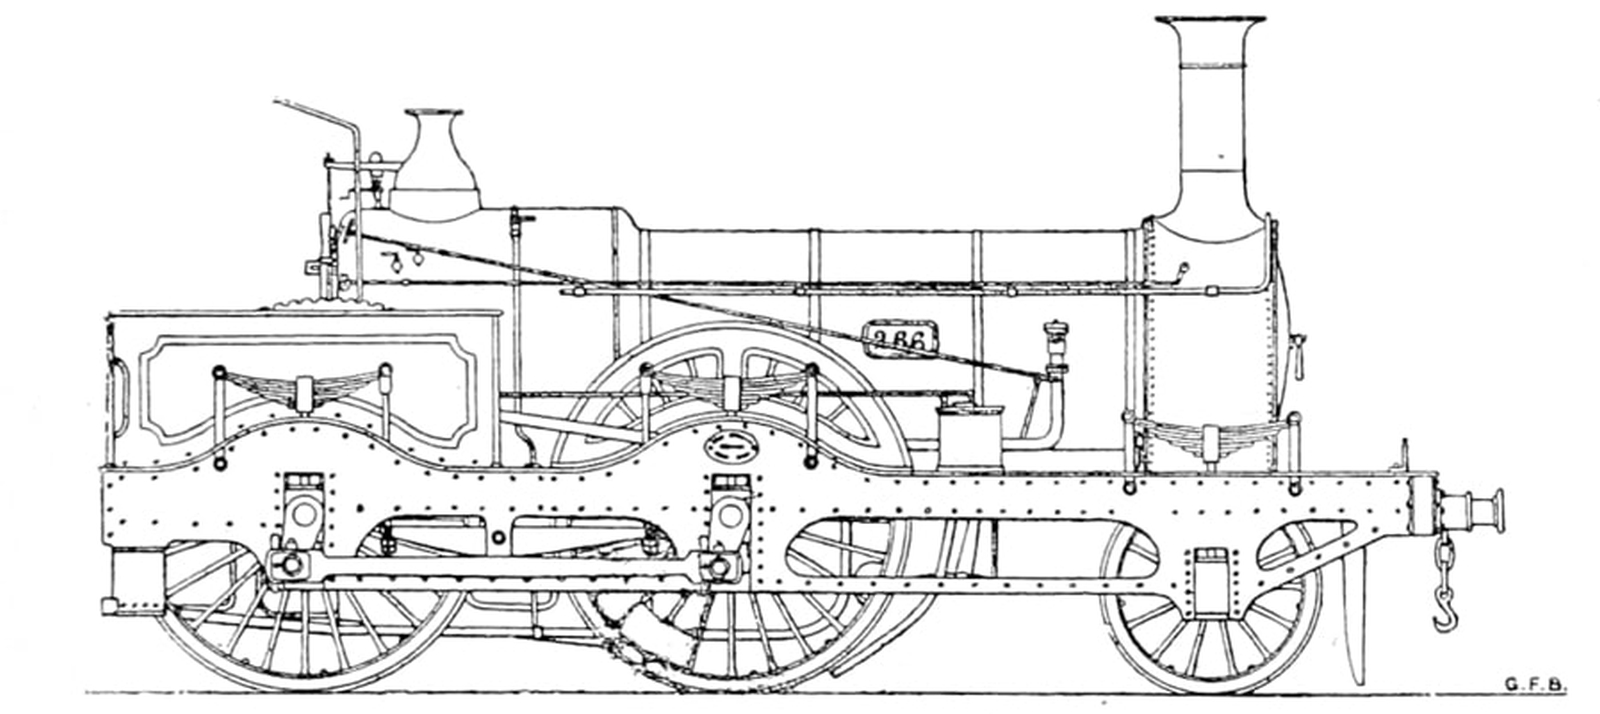 No. 266 built by Fowler